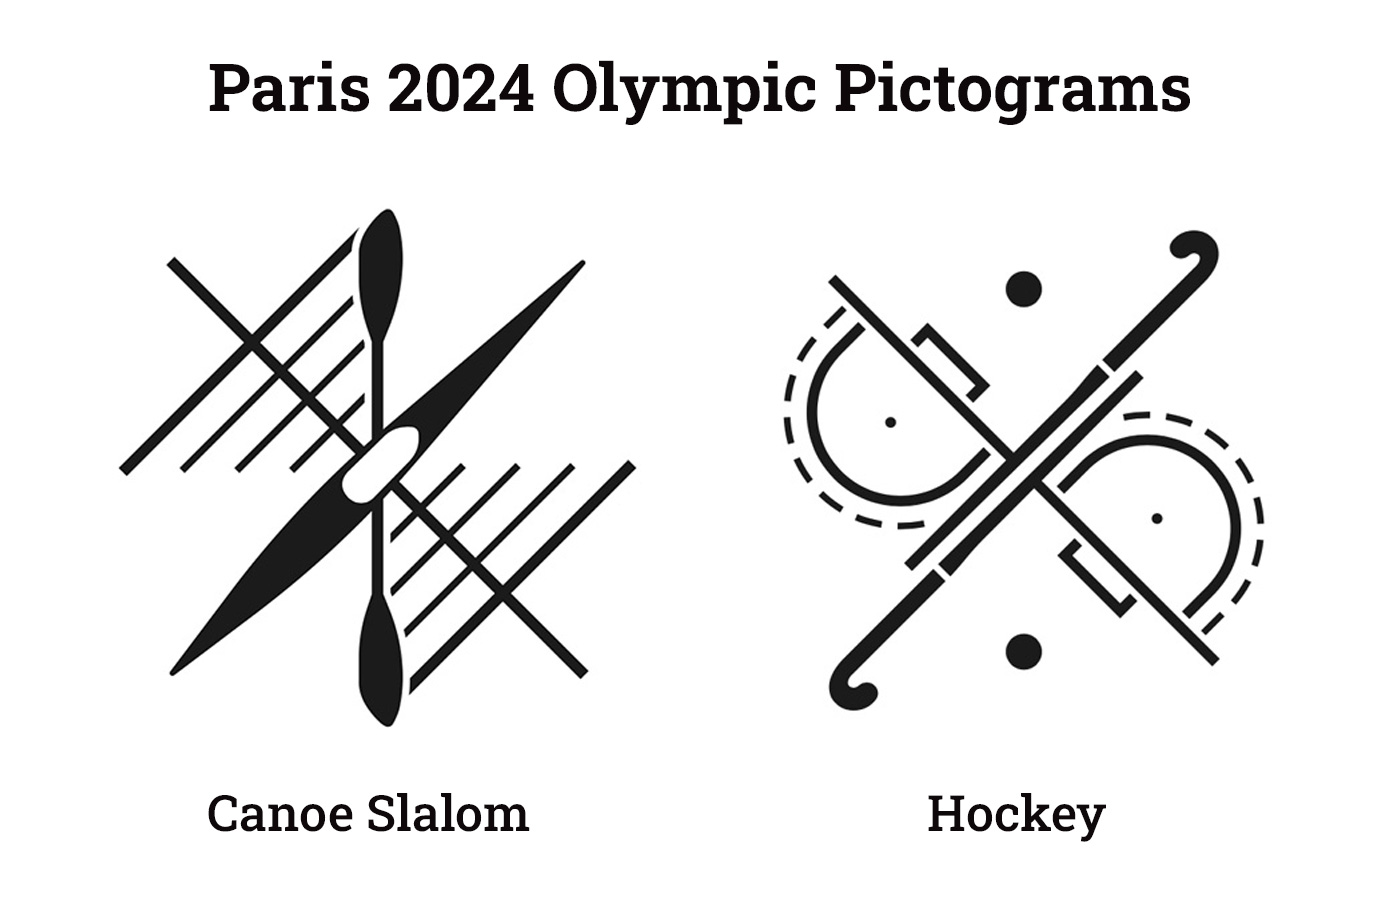 The image showcases two stylized black and white pictograms representing sports for the Paris